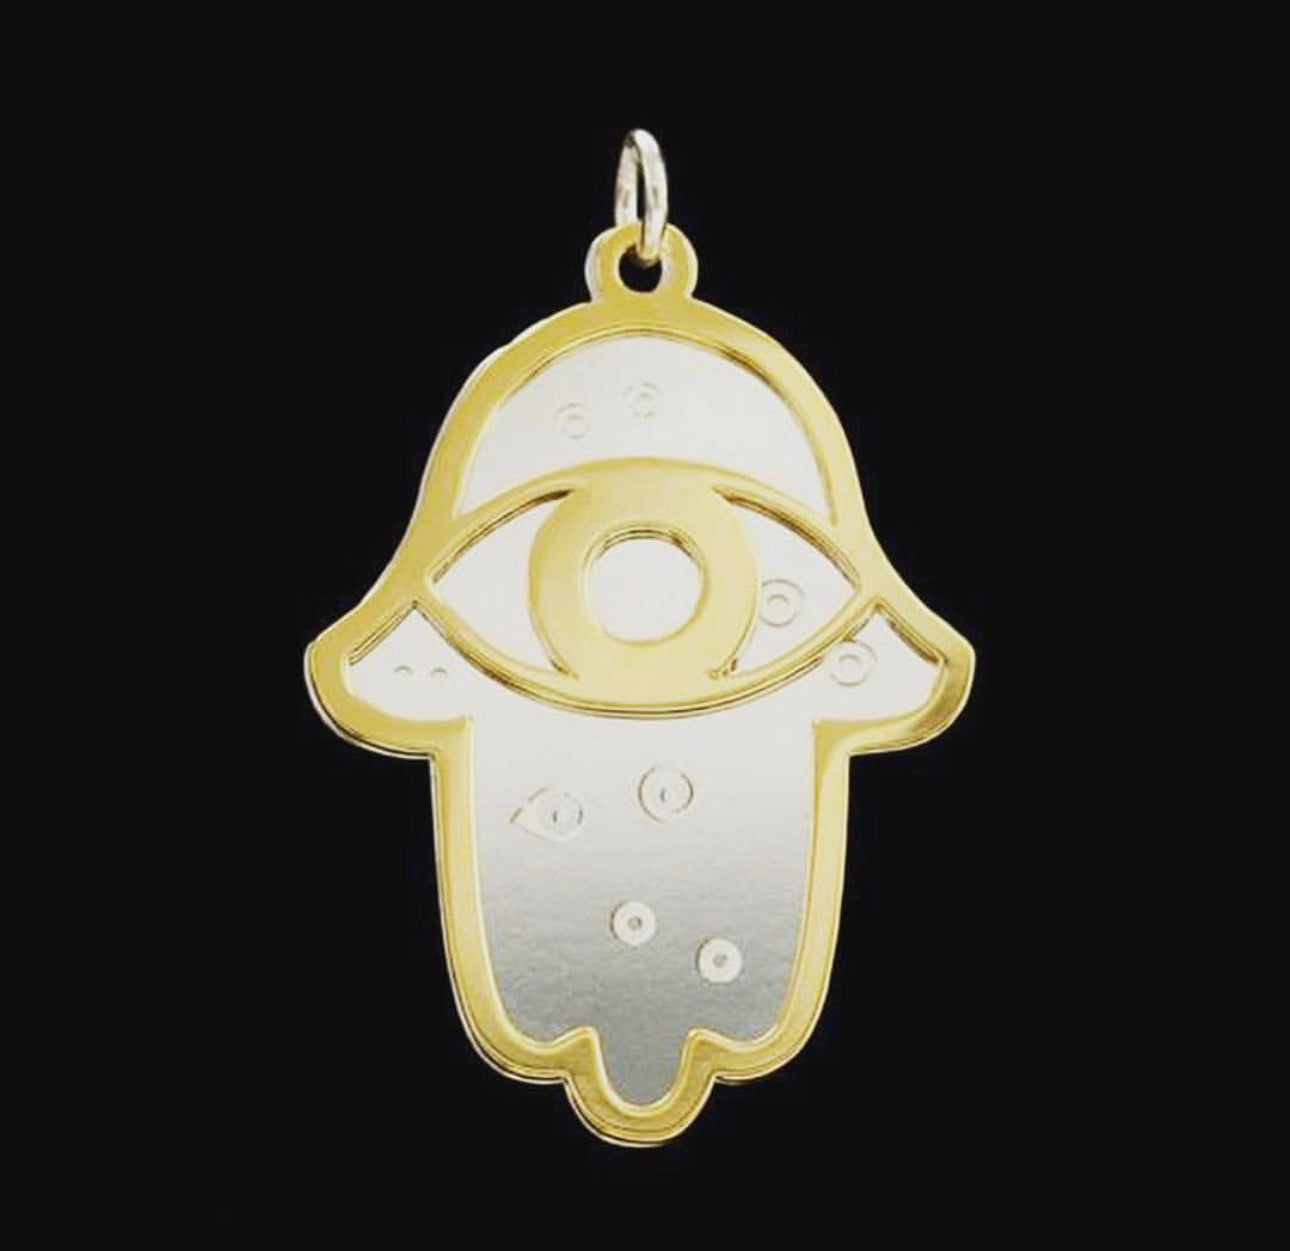 Days of Creation Pendant - Day 6